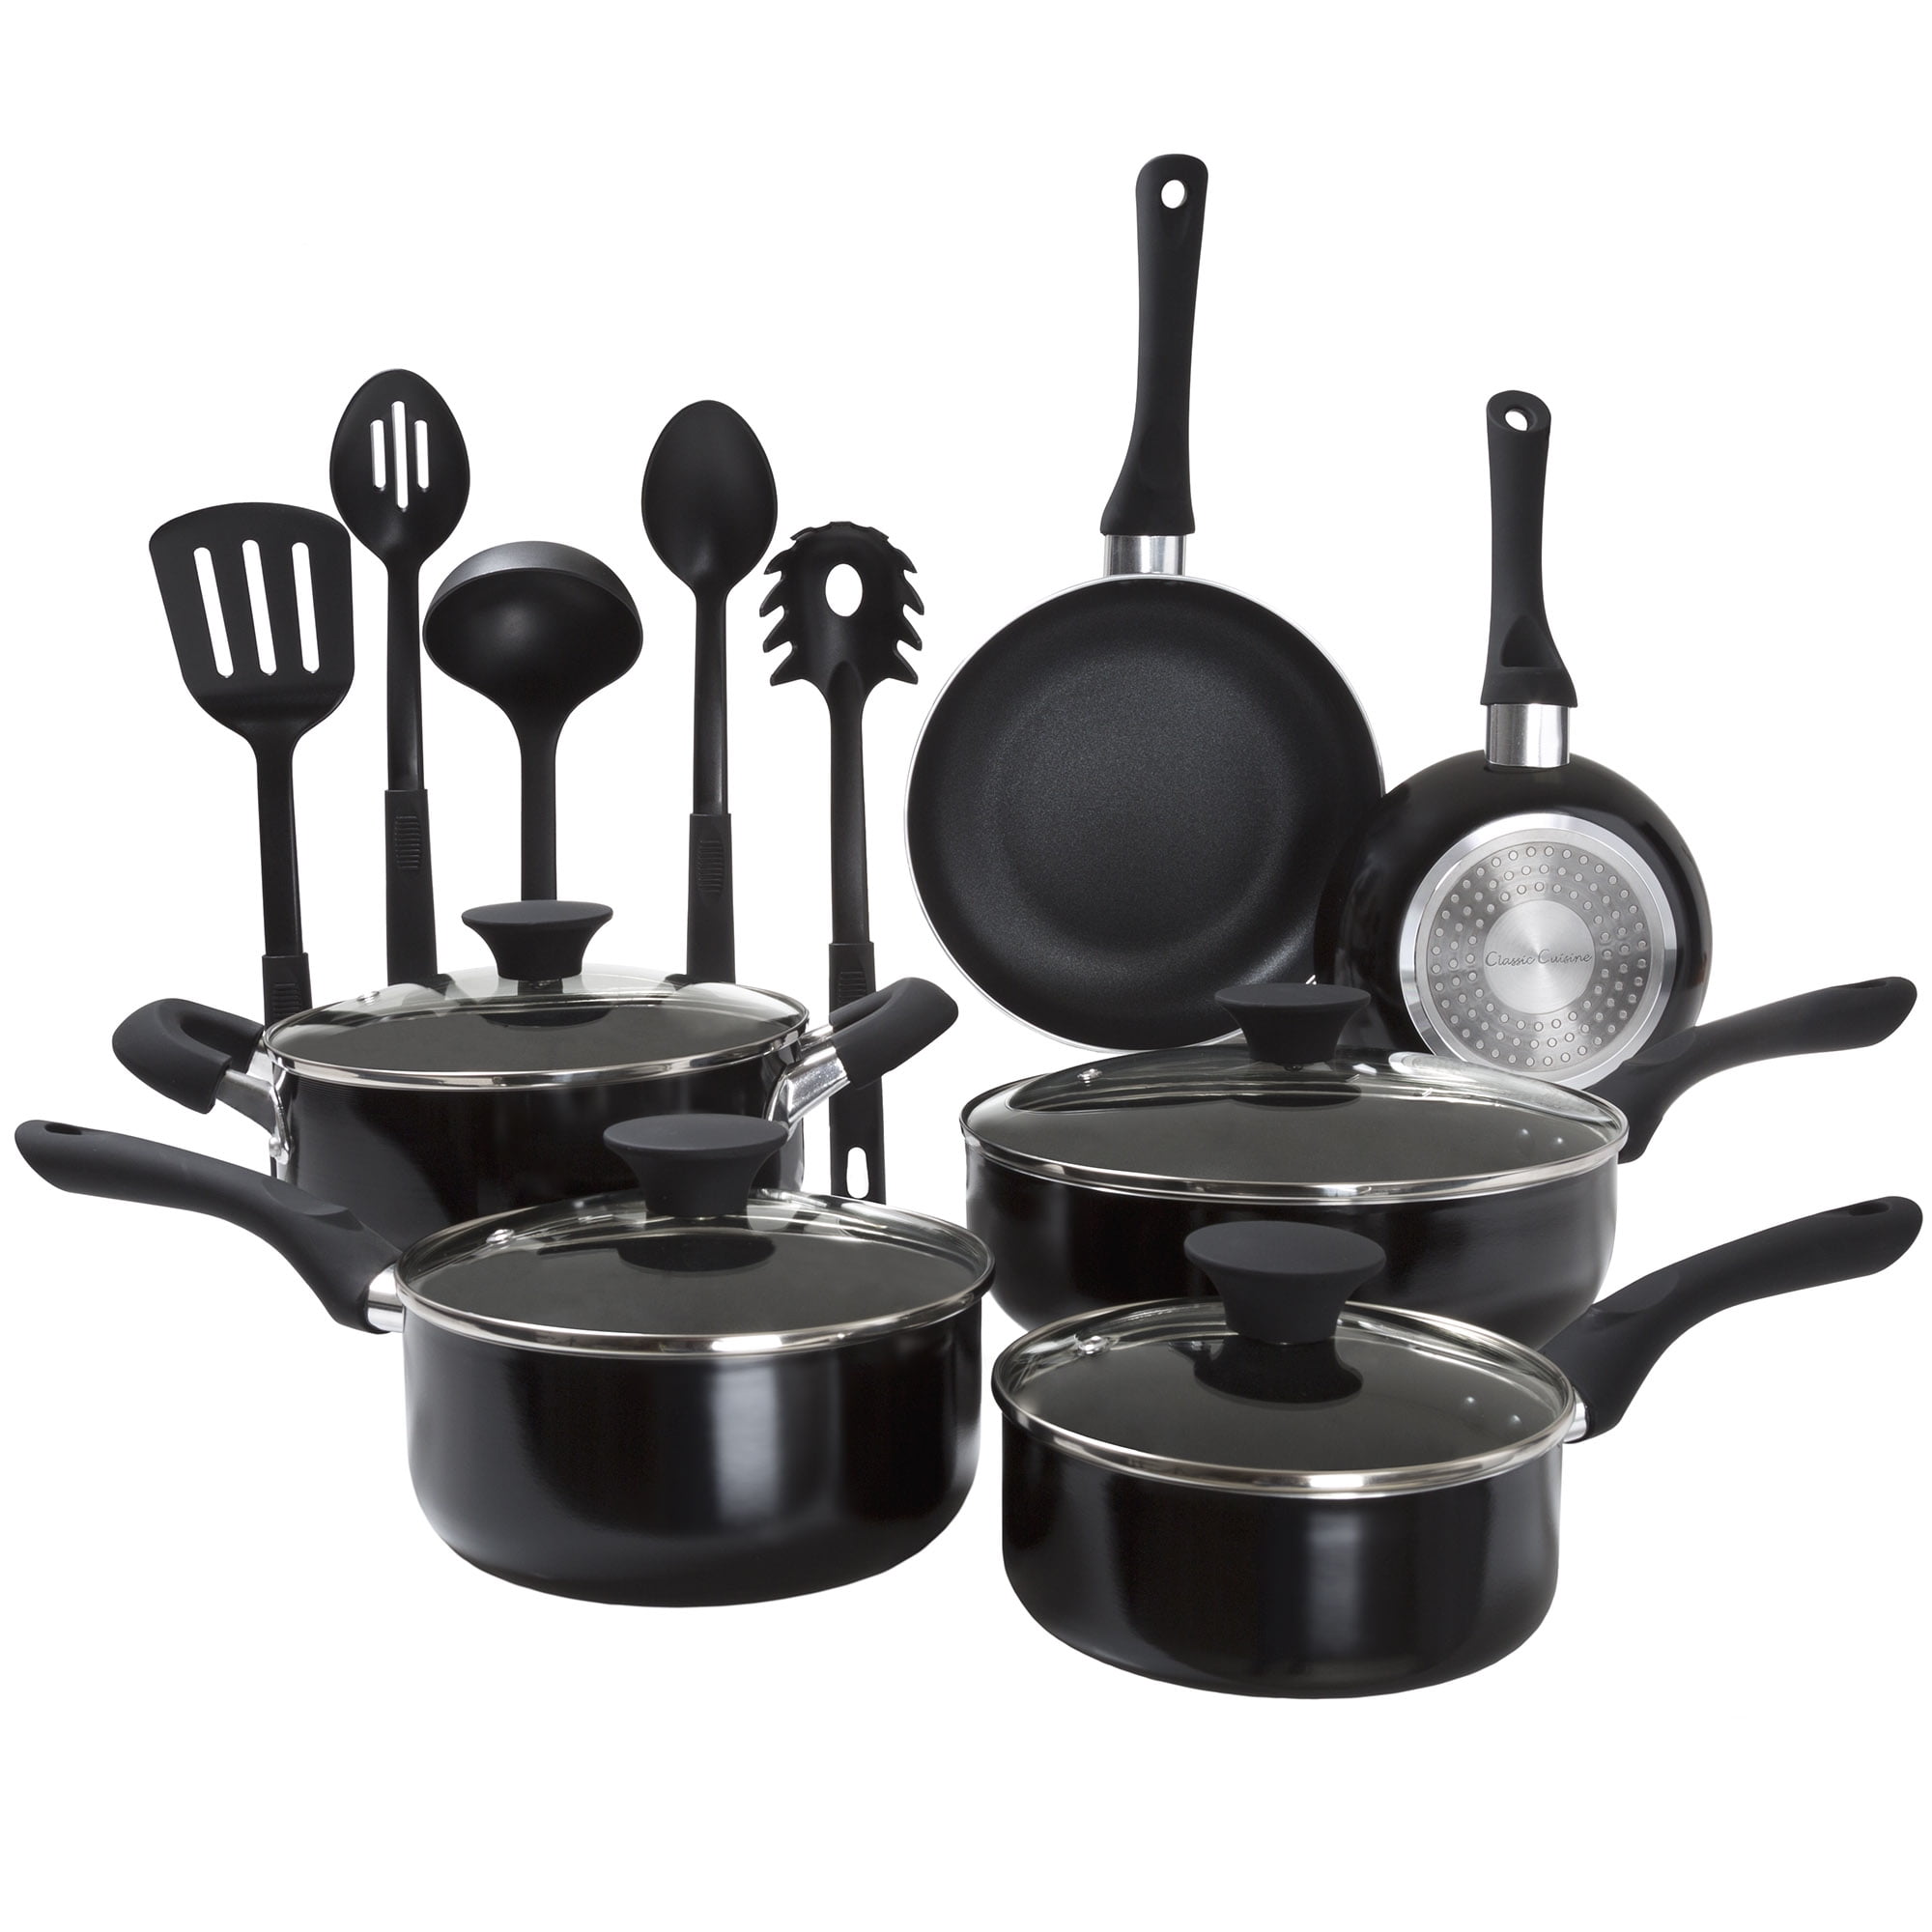 Kitchen Cookware Set, 3 Piece Saucepan Set with Glass Lids, Natural Durable  Granite Coating, Nonstick Sauce Pan Set, Durable & Oven Safe to 450°F